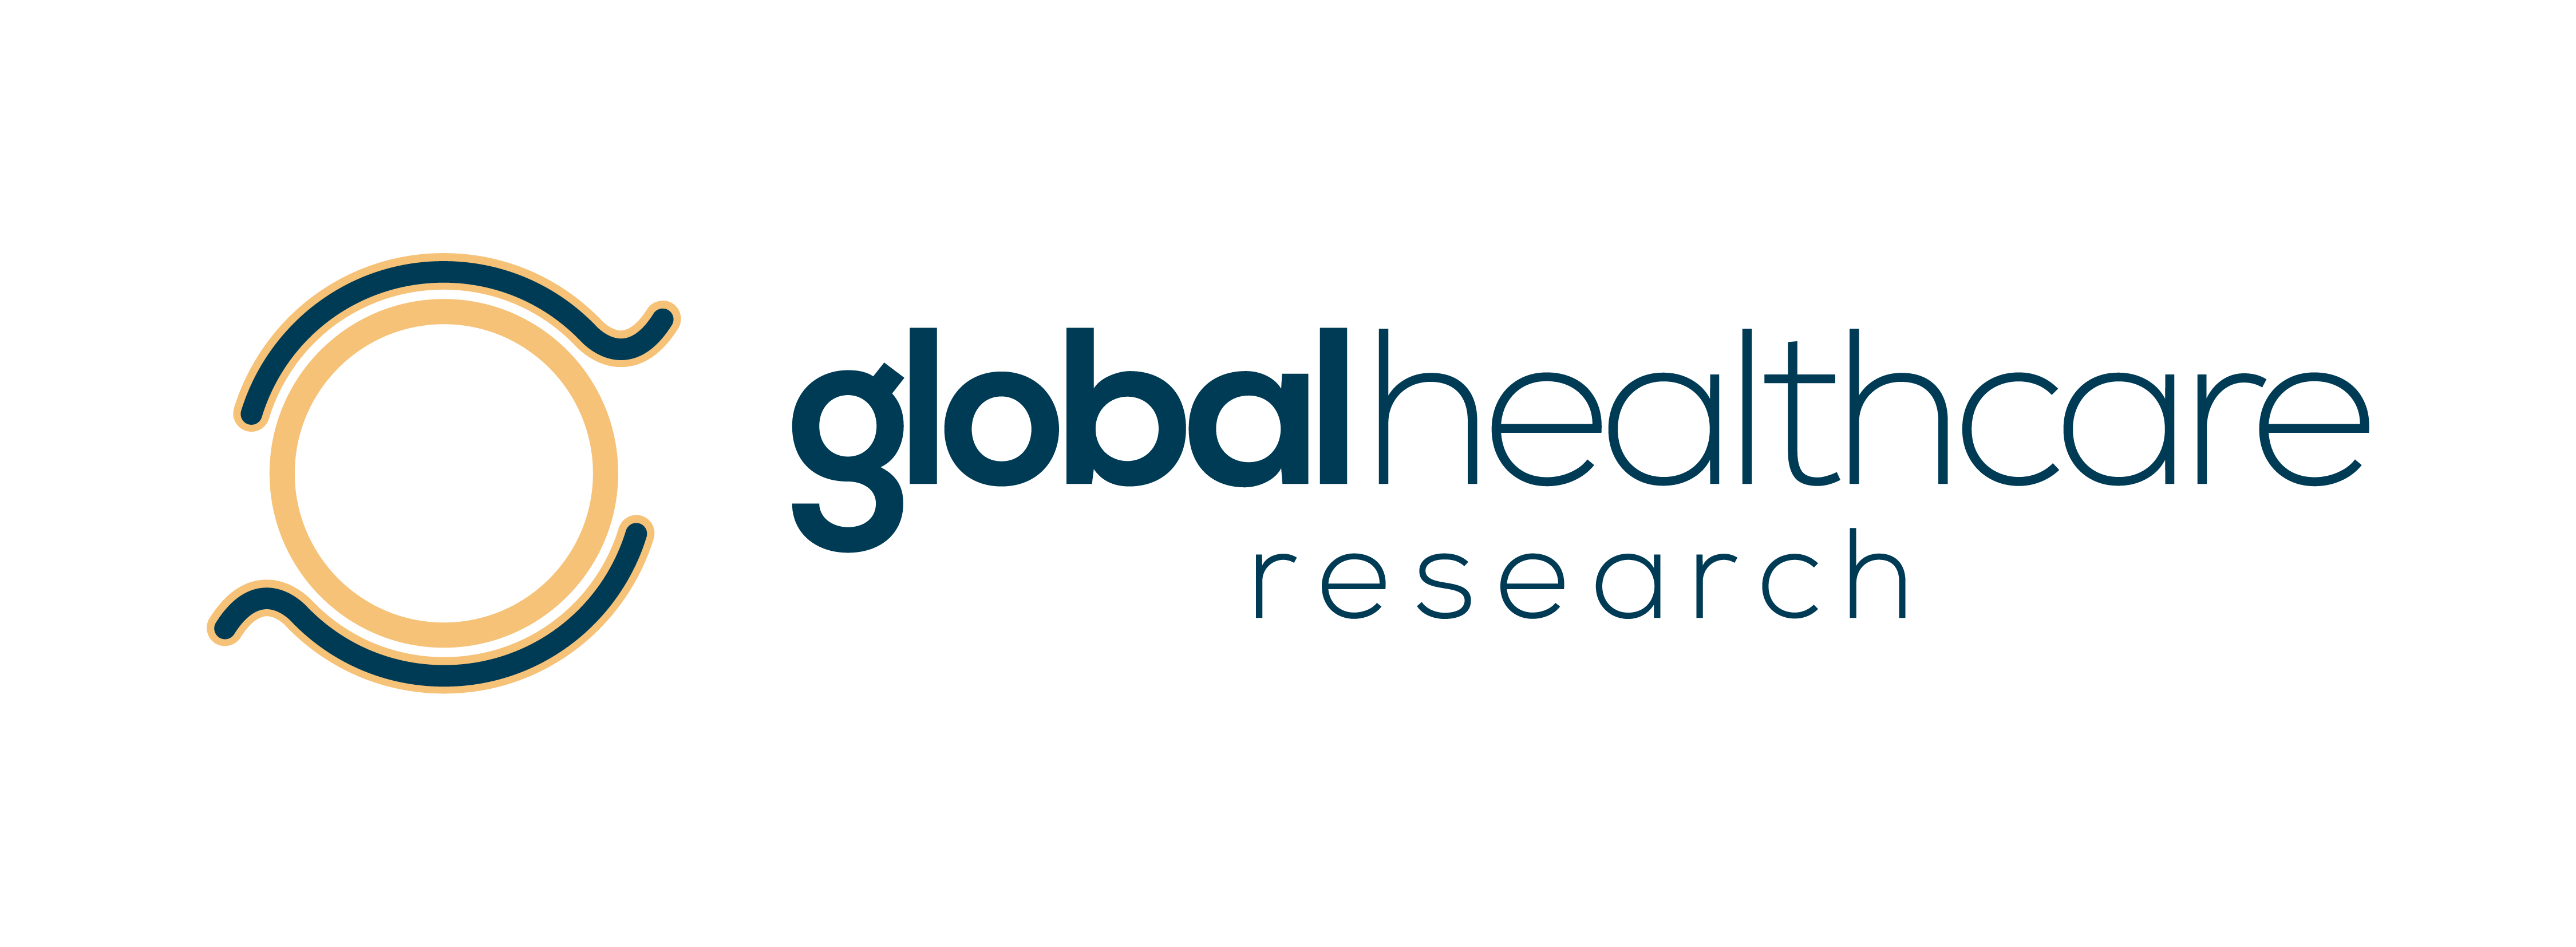 Global Healthcare Research